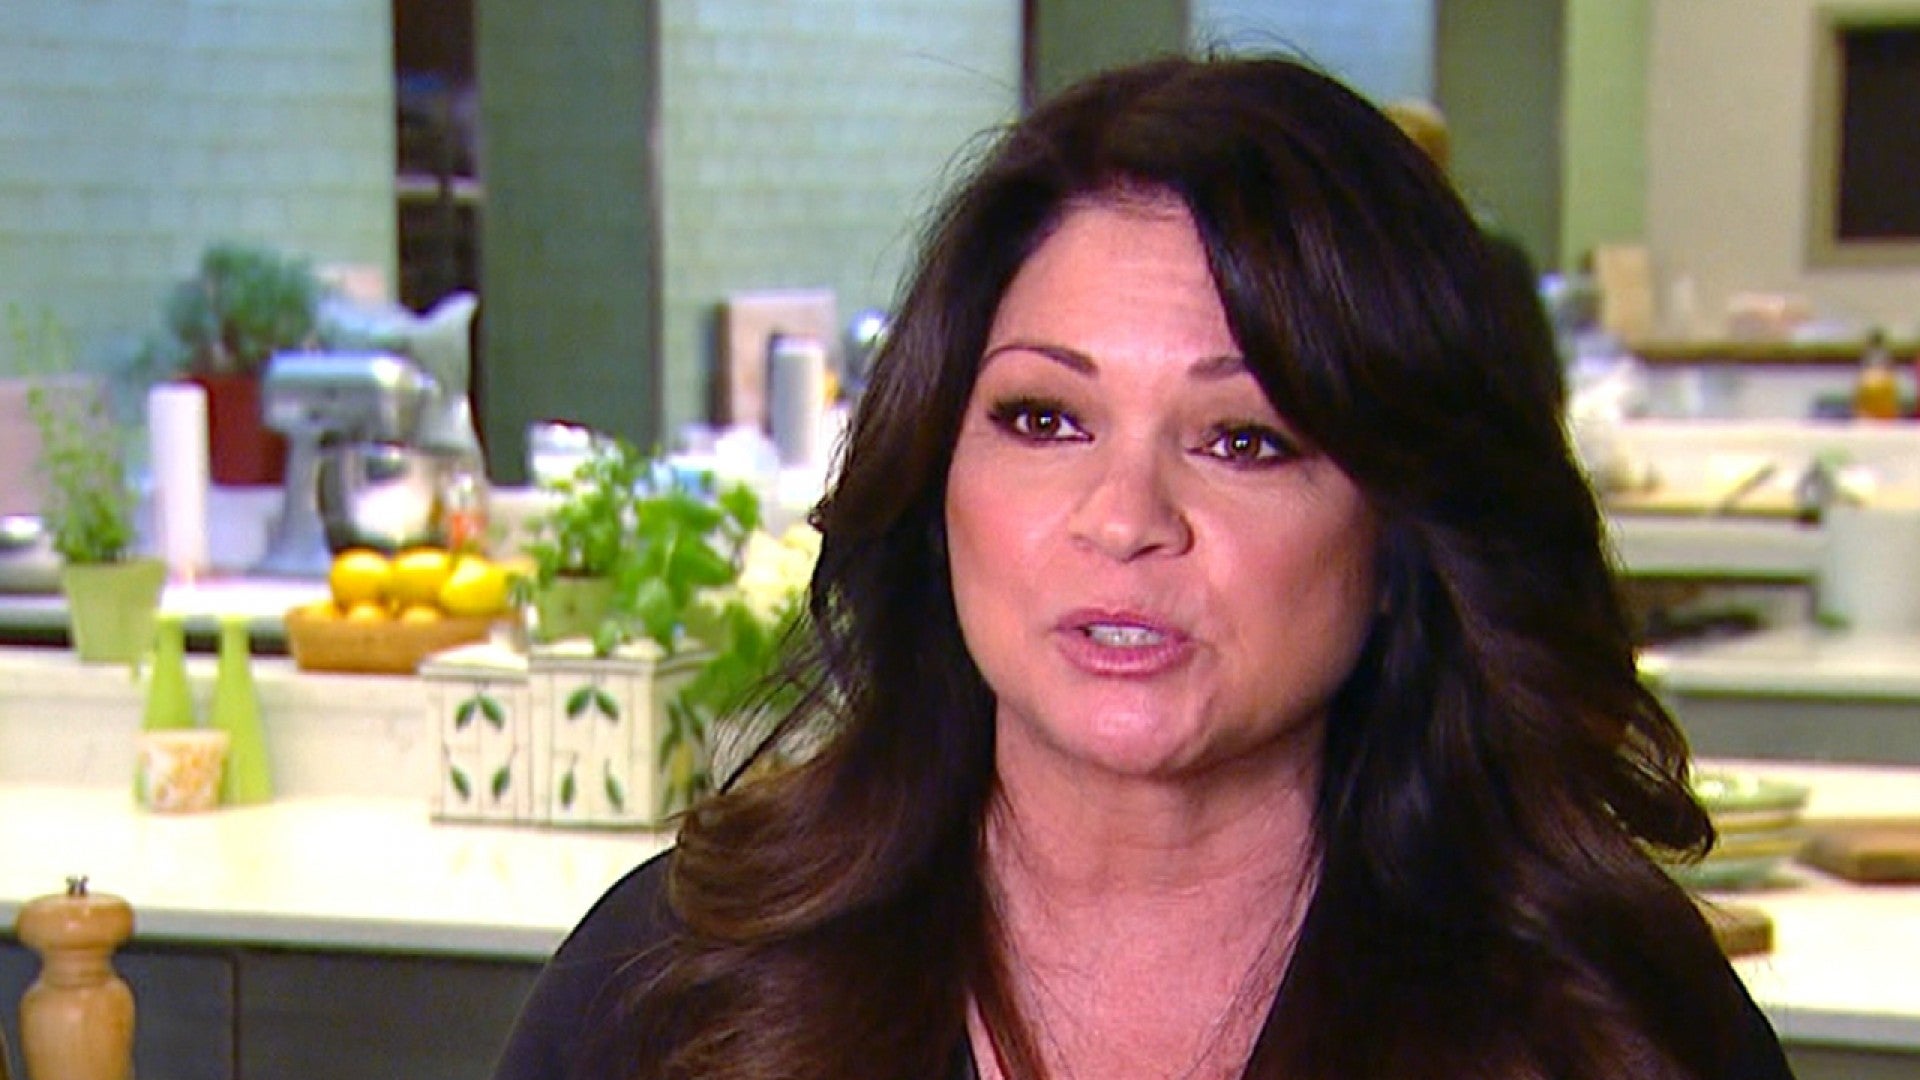 Valerie Bertinelli calls out her haters as she shows off gray hair